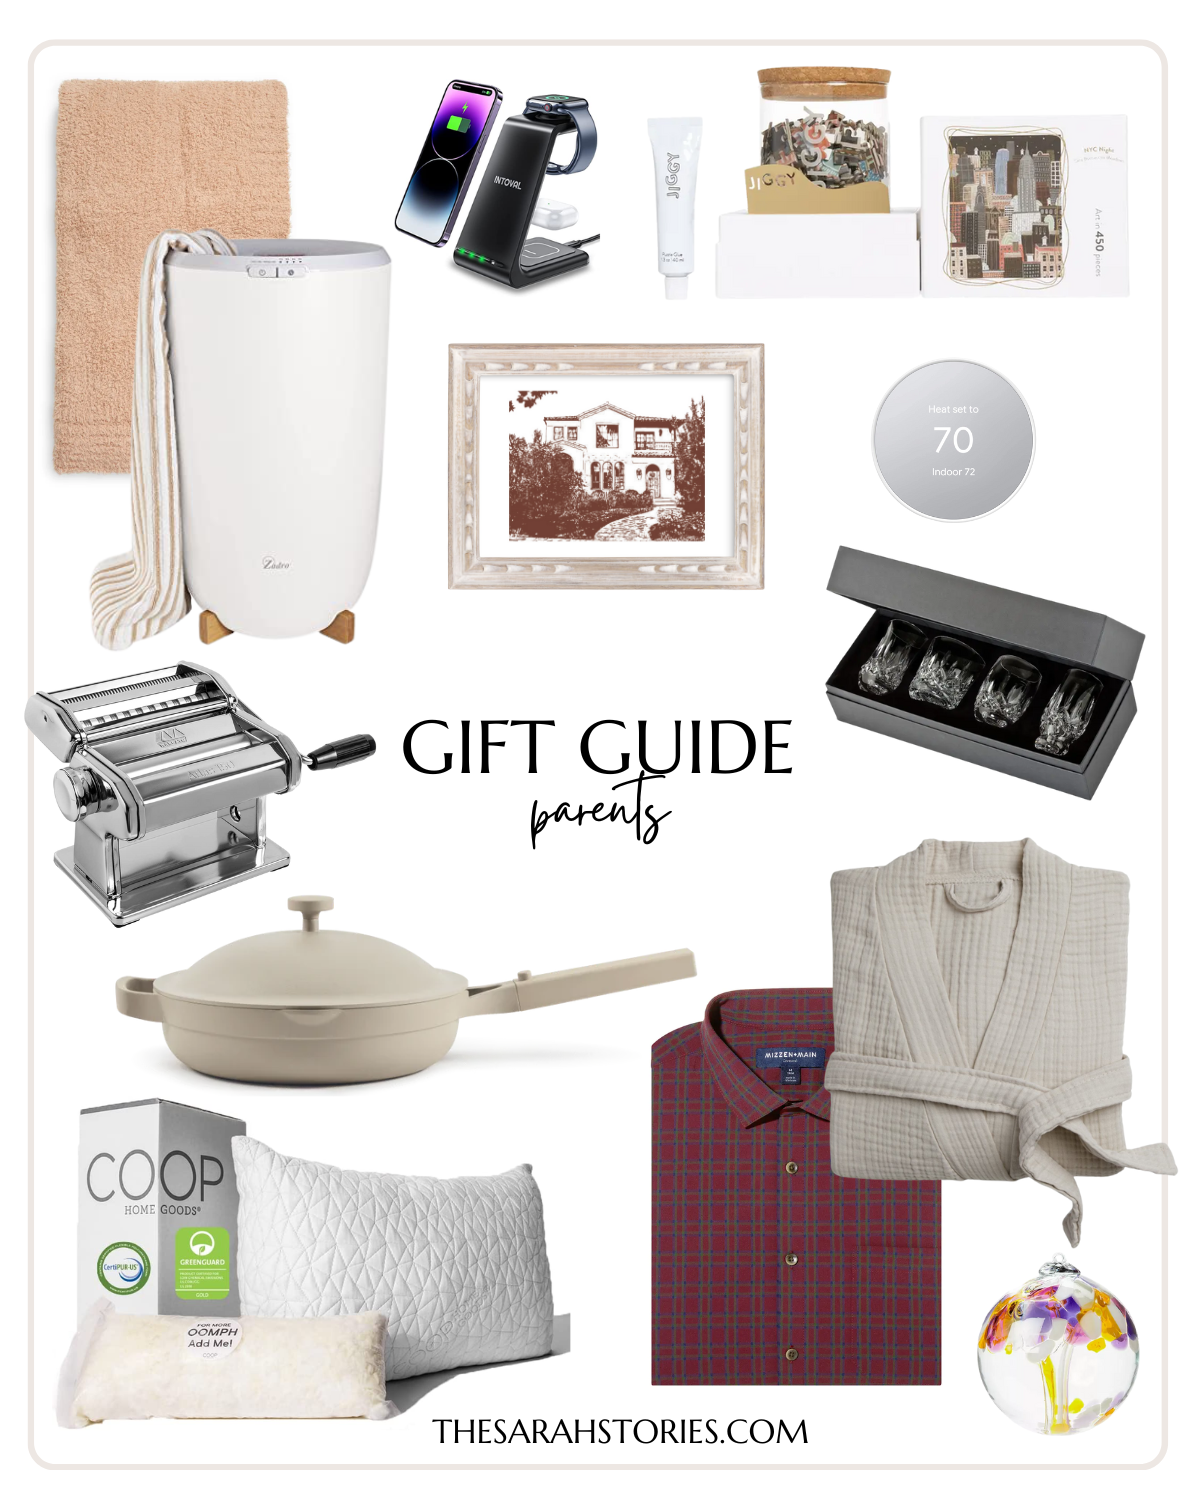 Holiday Gift ideas for those hard to shop for